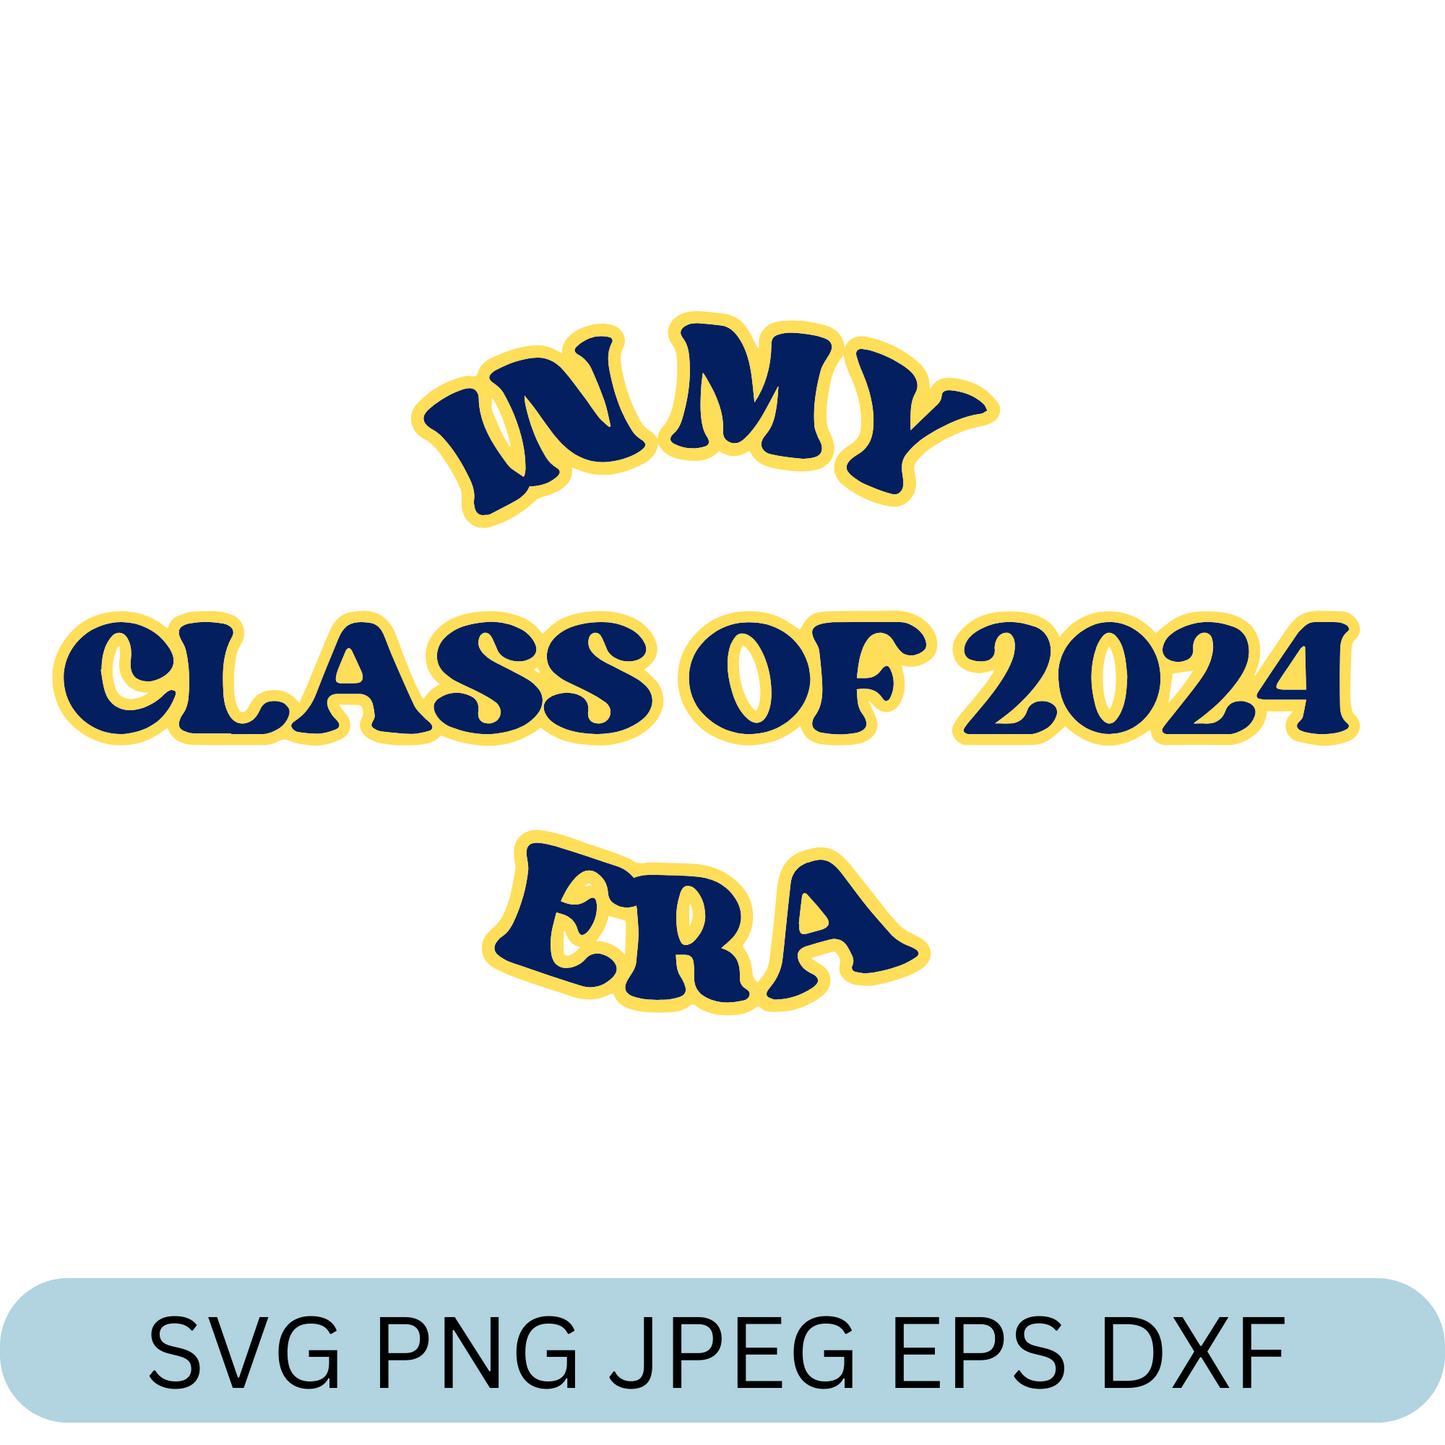 In My Class of 2024 Era Style SVG